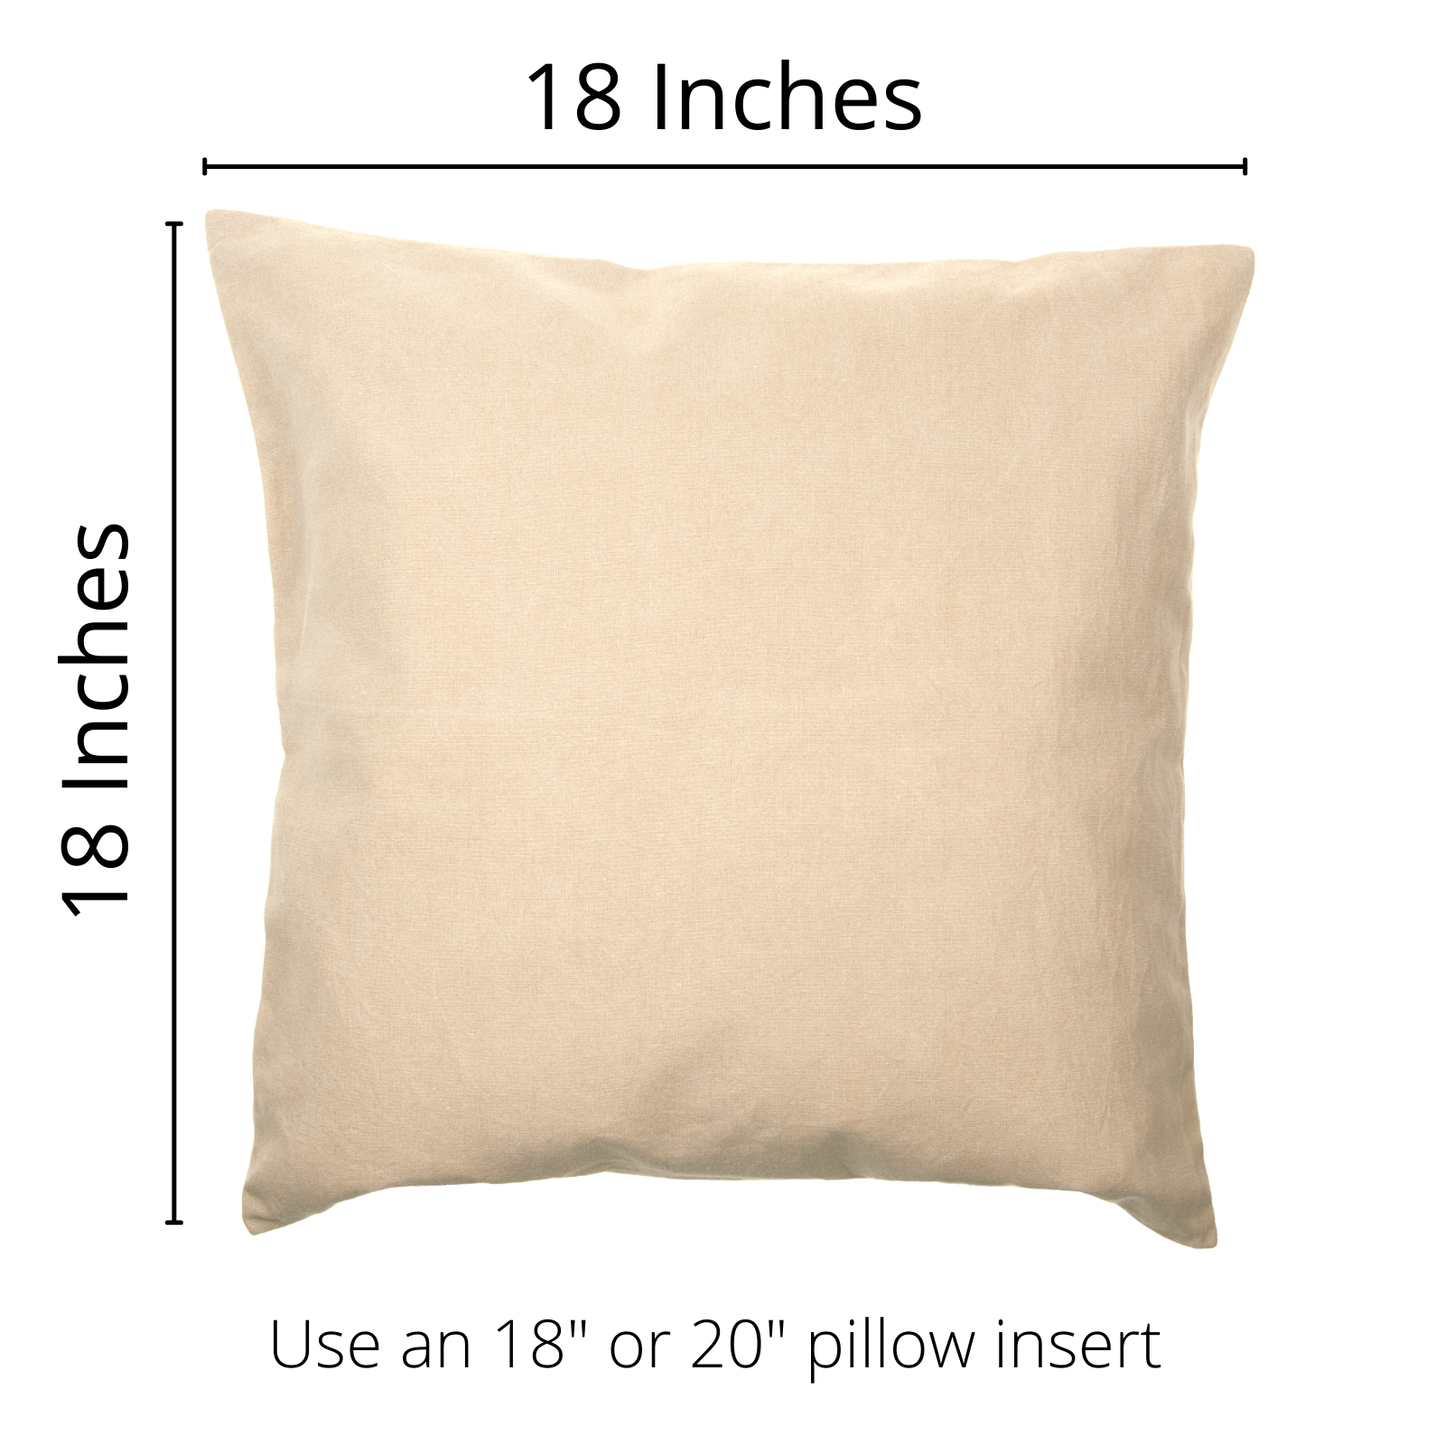 Personalized Wildflowers Pillow Cover